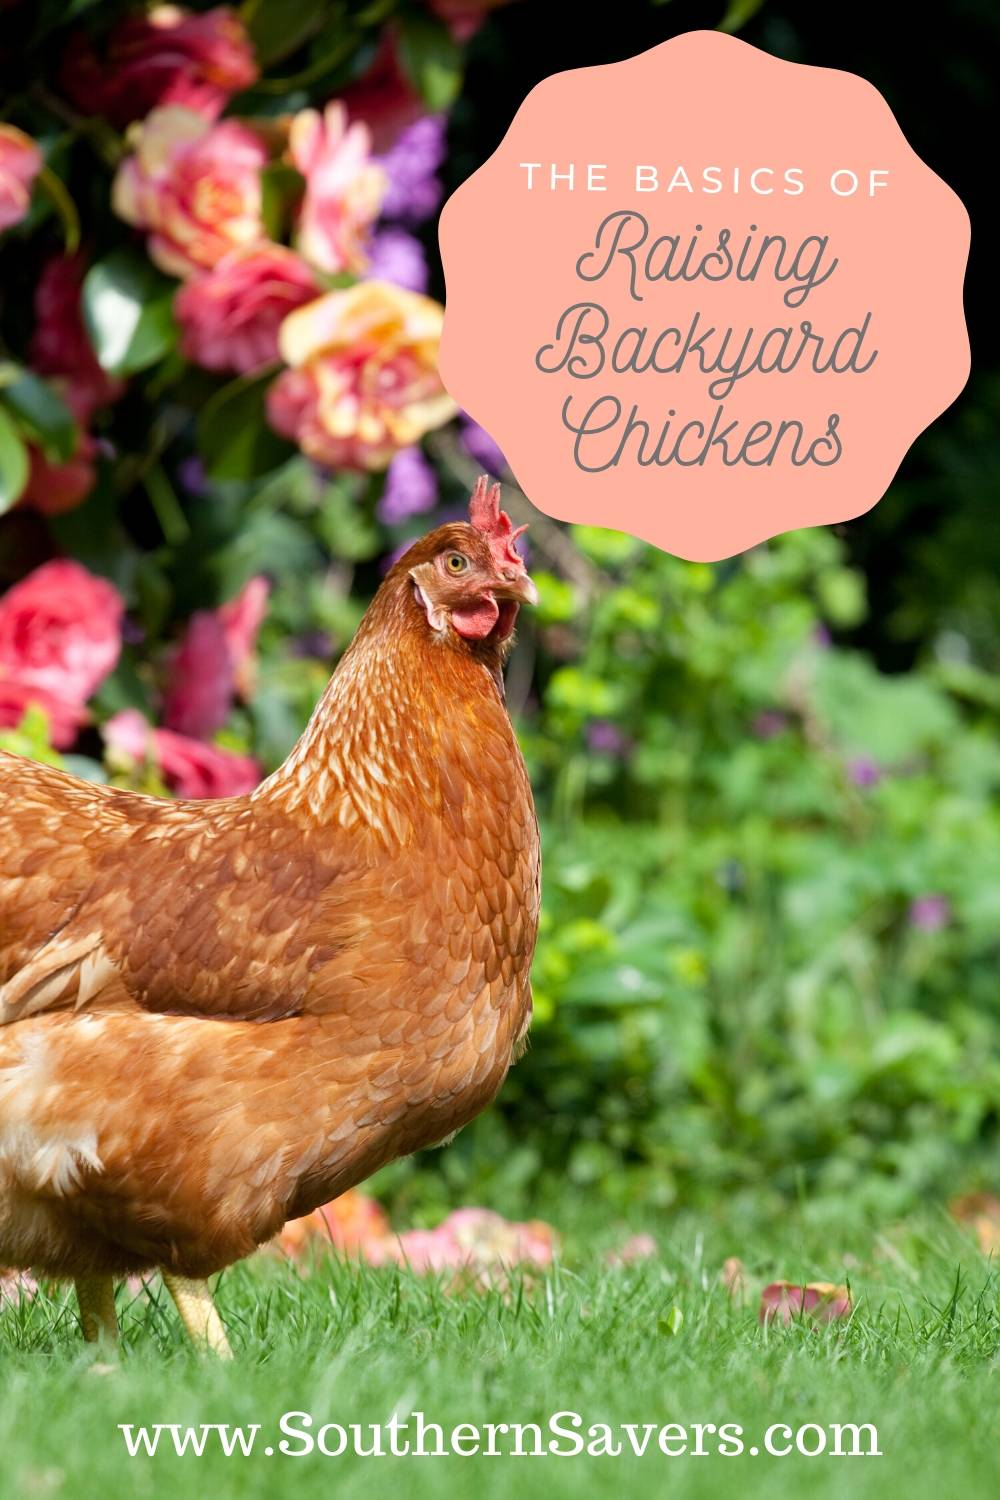 Looking to get some backyard chickens? Here are some quick tips to get you started on a fun family project that will have you overflowing with eggs!